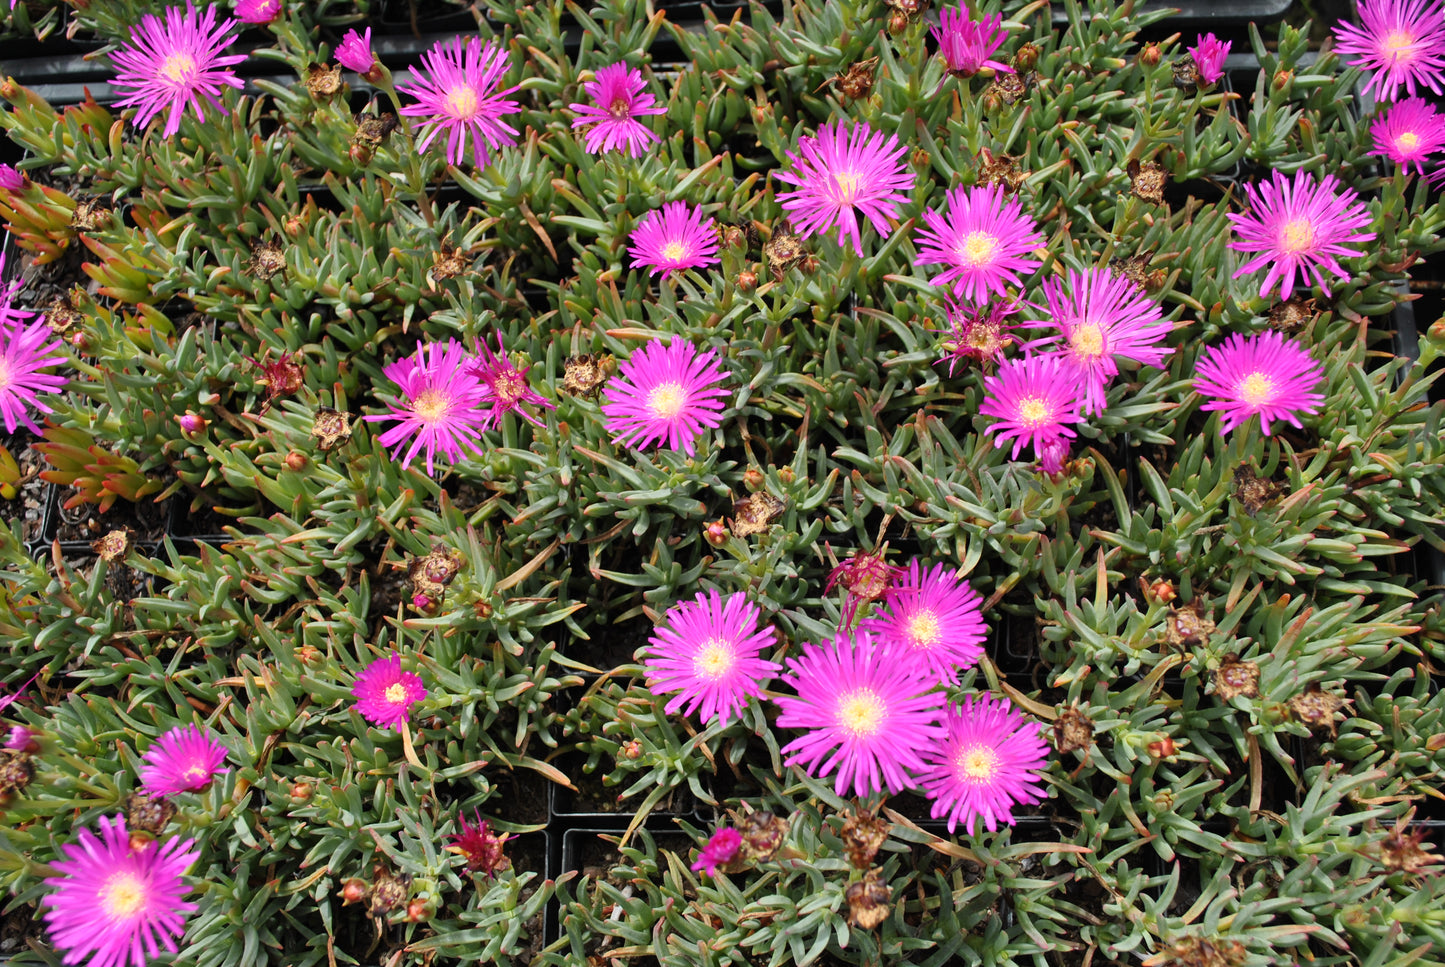 Many small pots of the Carpobrotus glaucescens 'Pig Face' with lovely purple and yellow flower